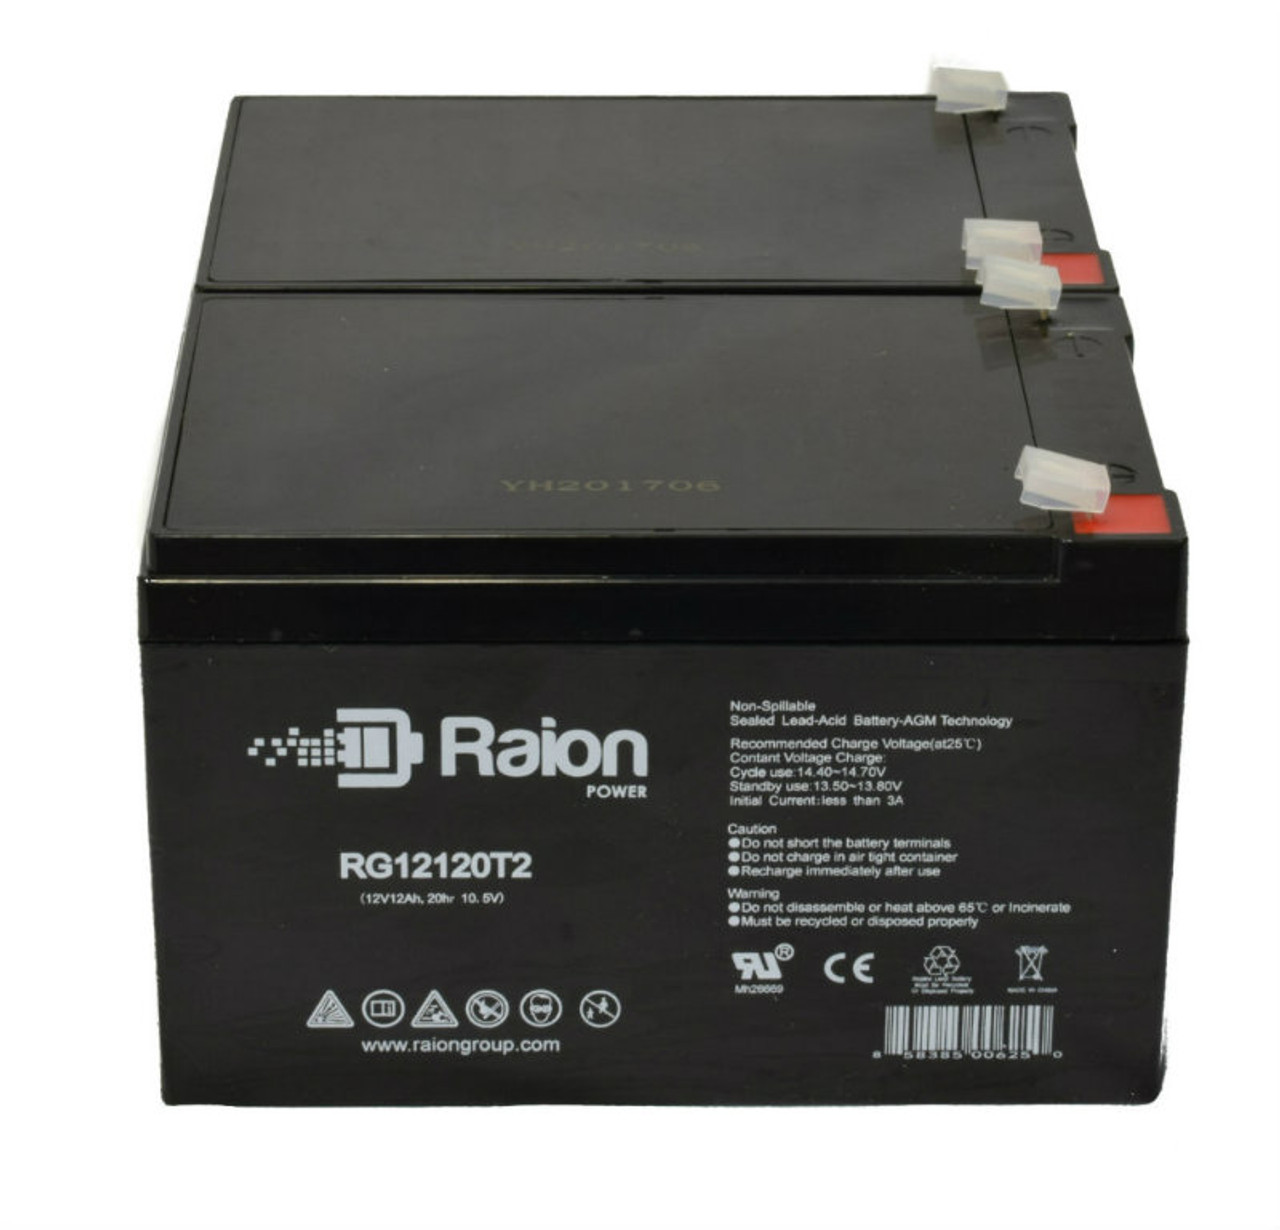 Raion Power RG12120T2 12V 12Ah Replacement Medical Equipment Battery for ABIOMED AB5000 Console - 2 Pack